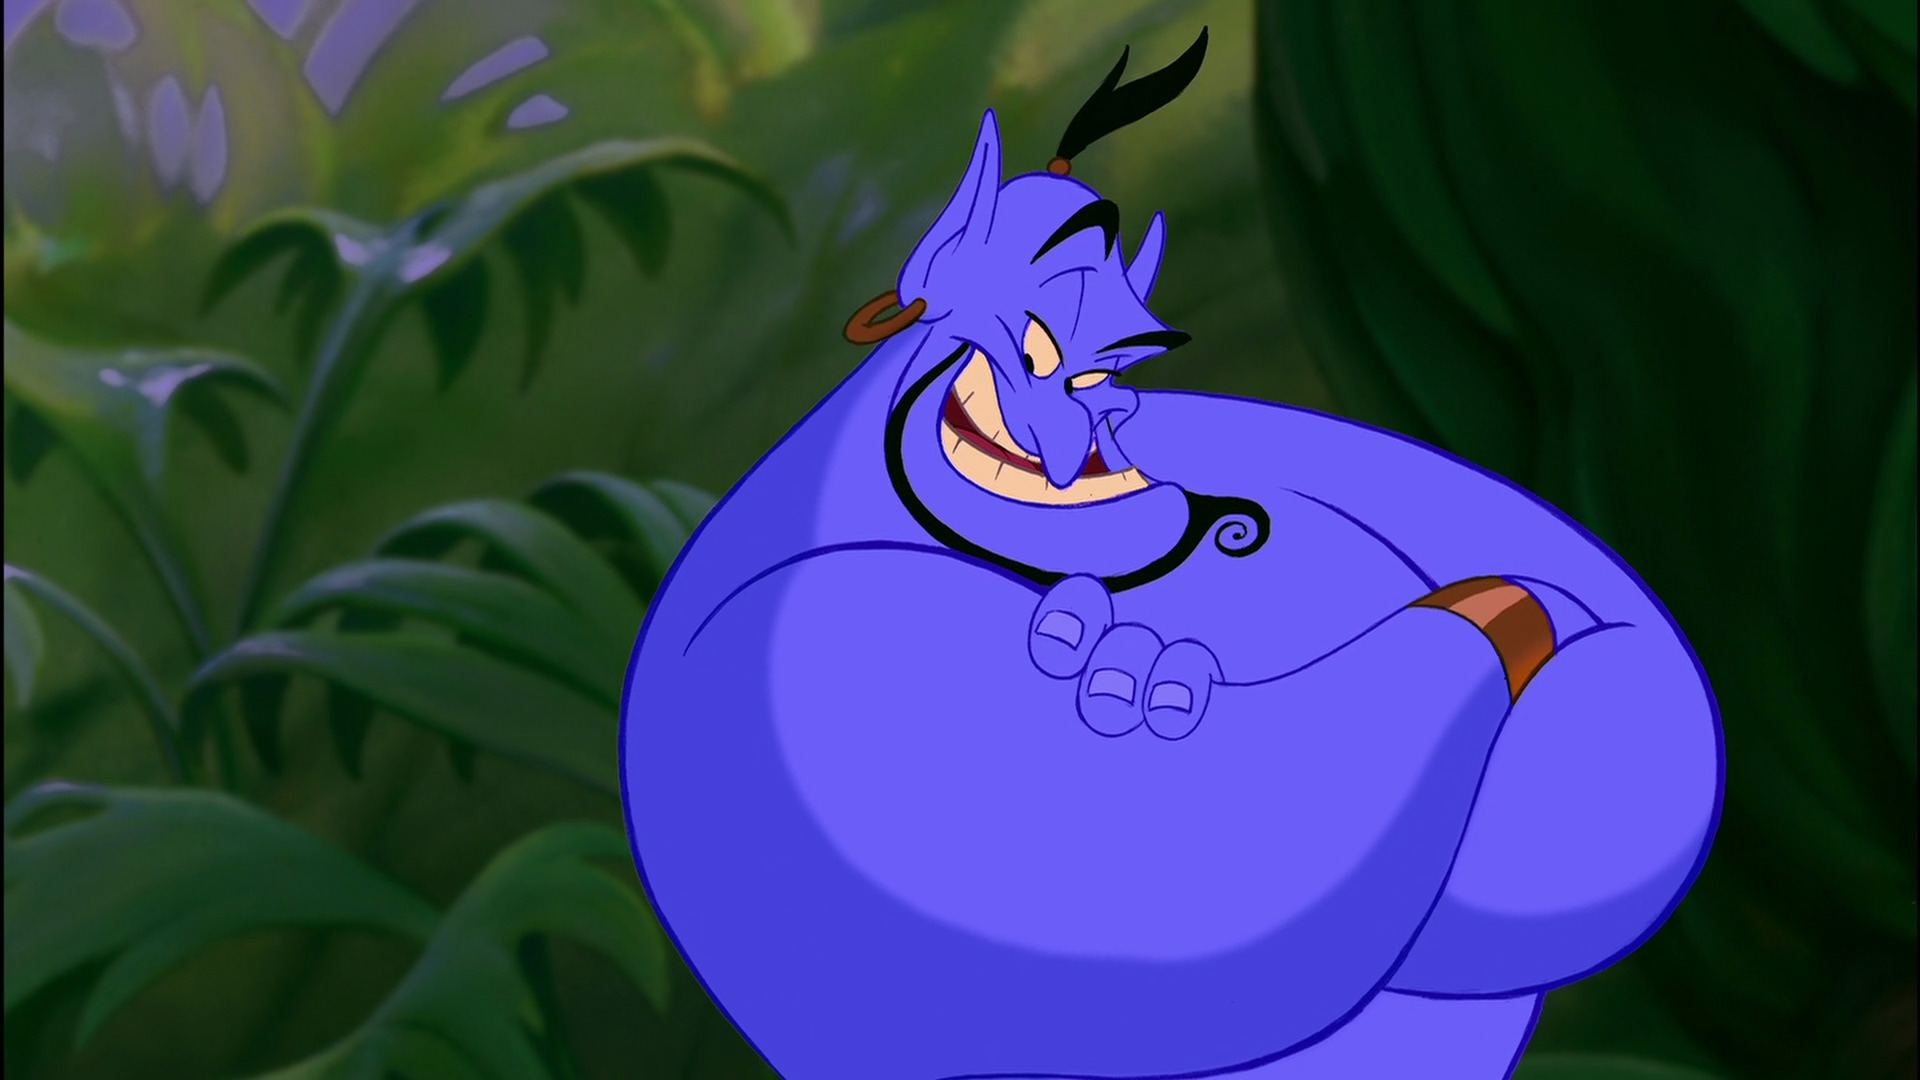 Will Smith In Talks For Genie Role In New “Aladdin” Live-Action Movie